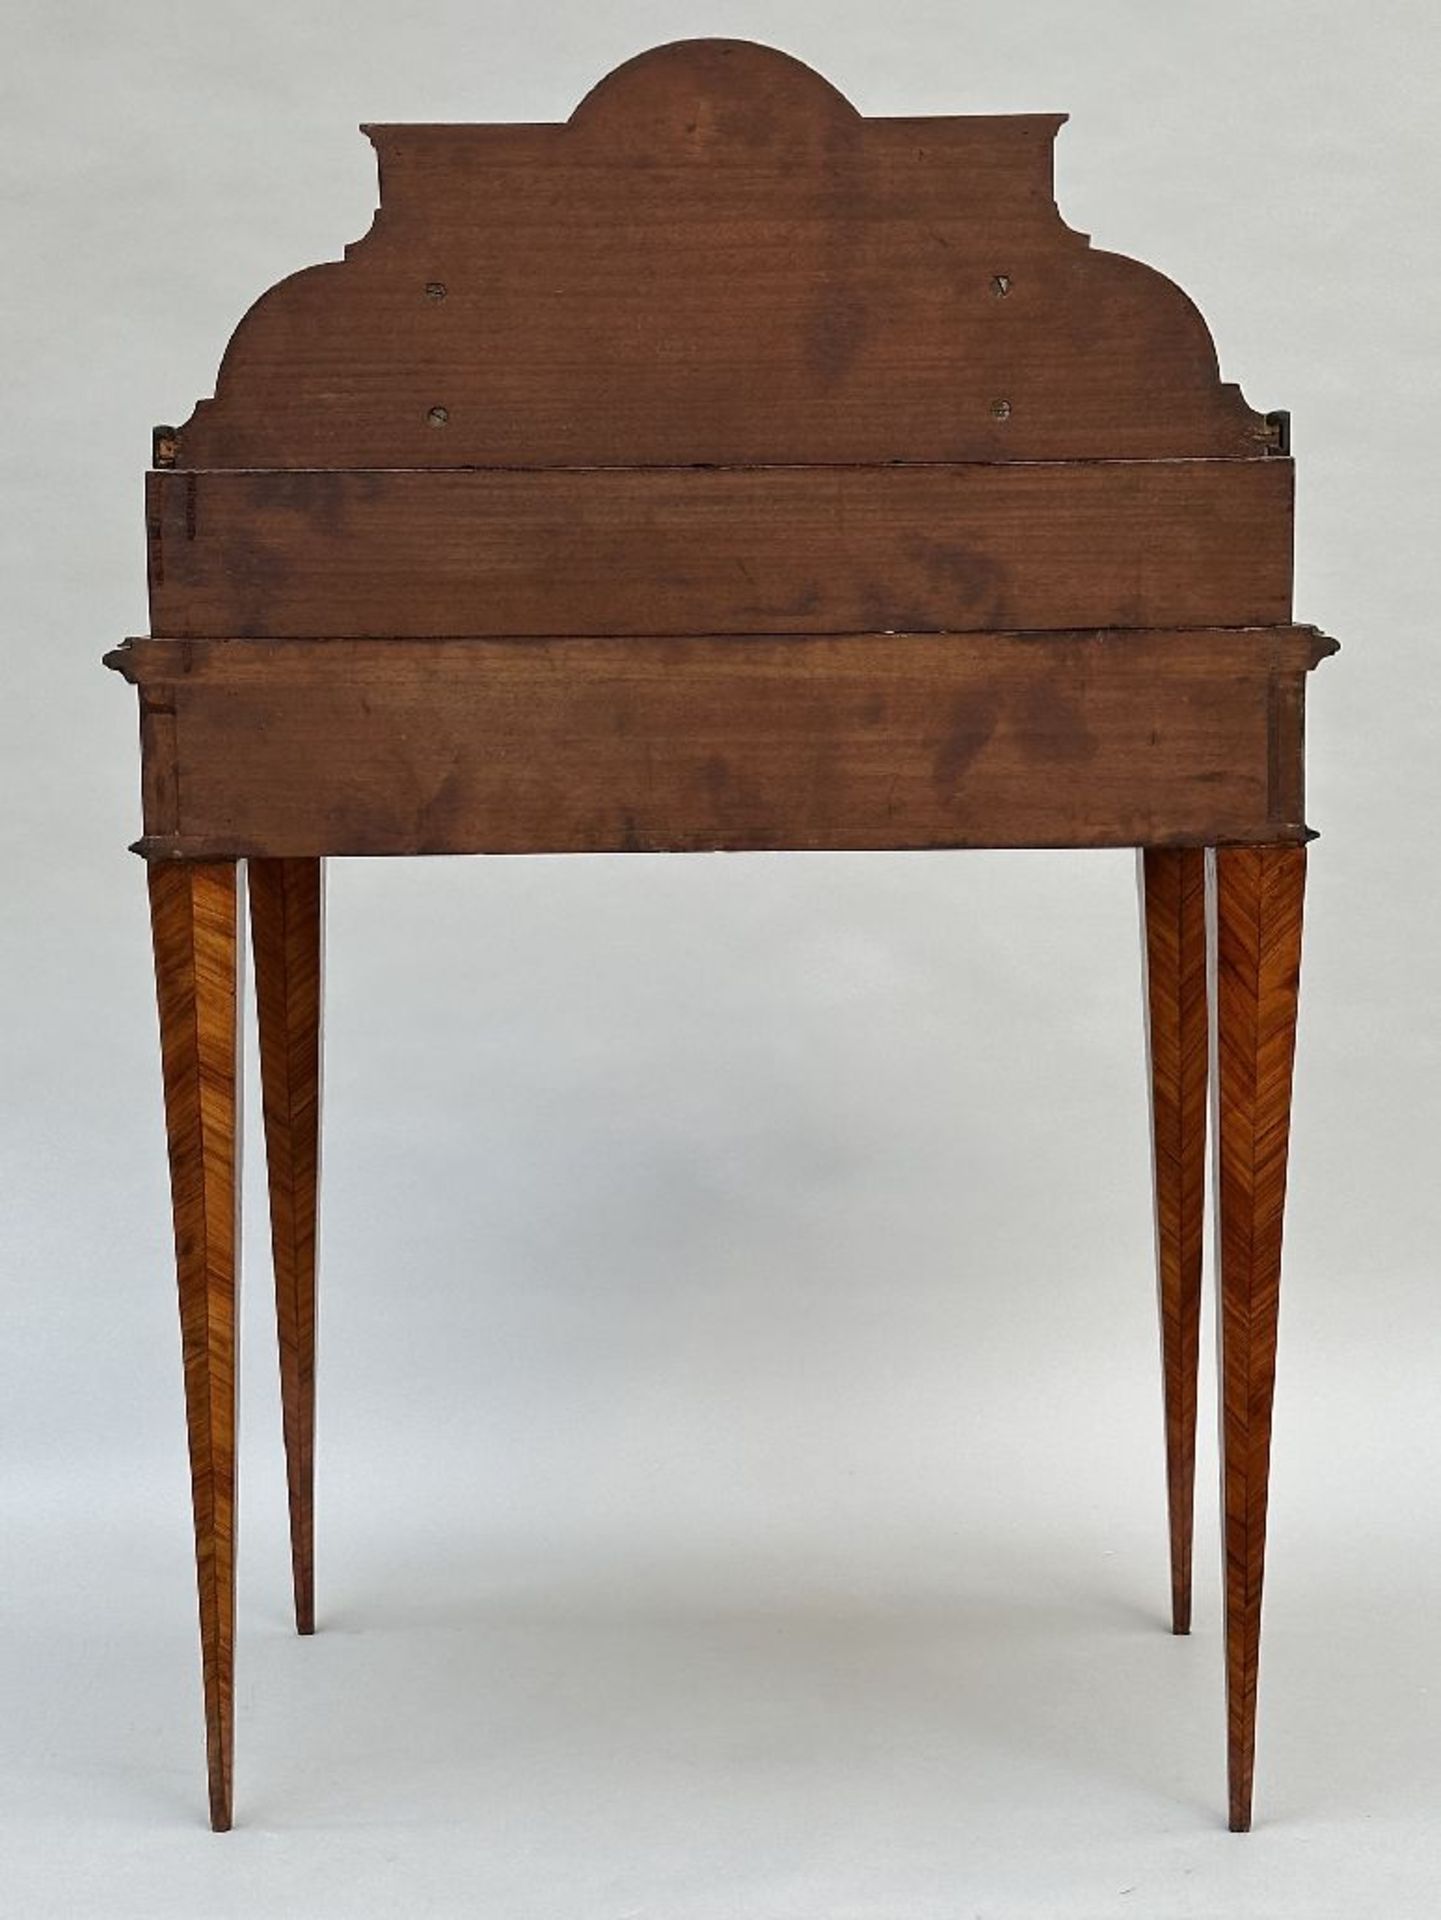 A Louis XVI style desk with inlaywork, 19th century - Image 4 of 5